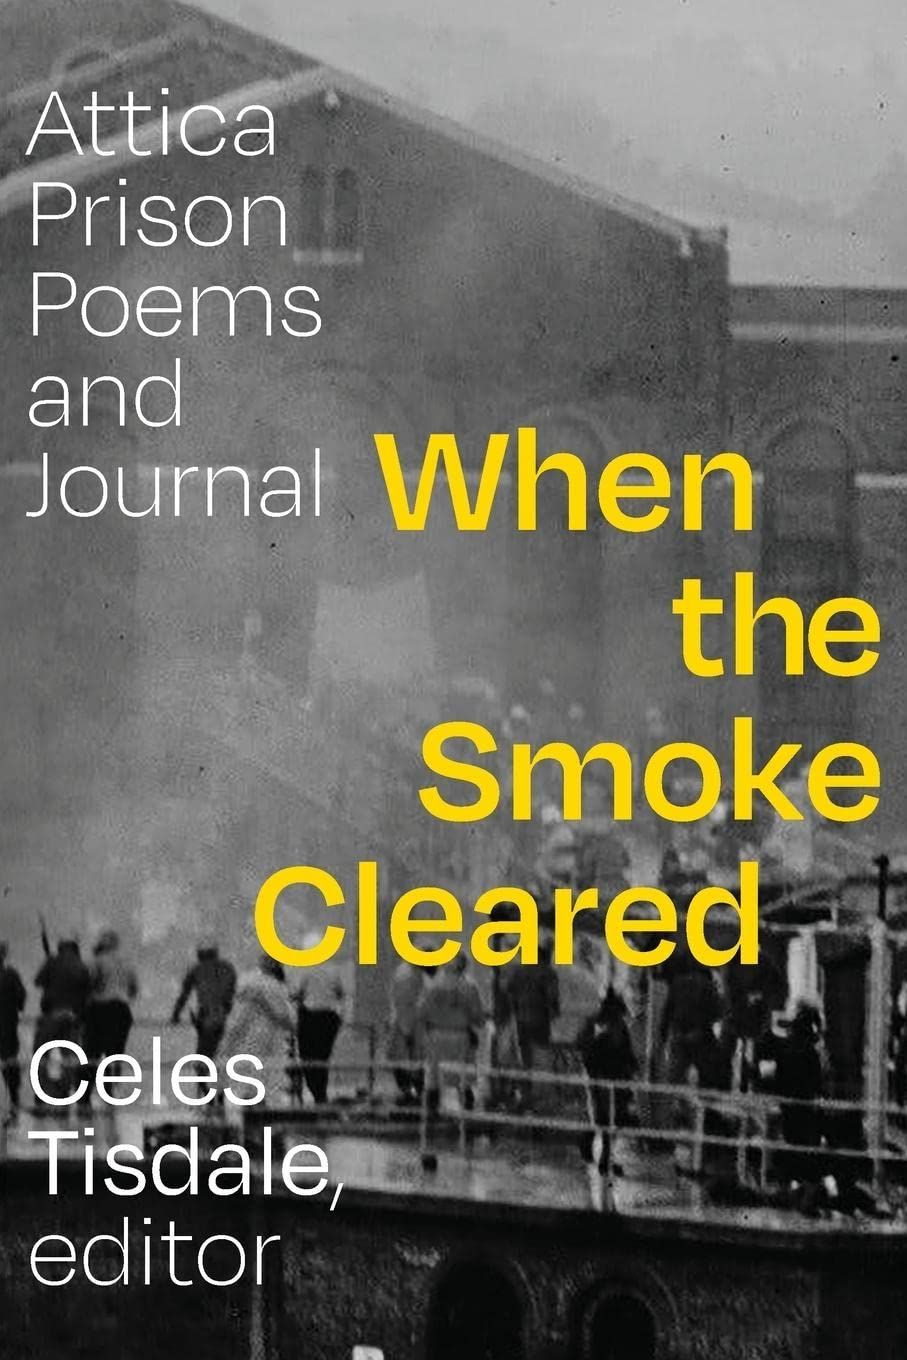 Lyric Forms for Carceral Justice: On Attica Prison and Celes Tisdale’s “When the Smoke Cleared”